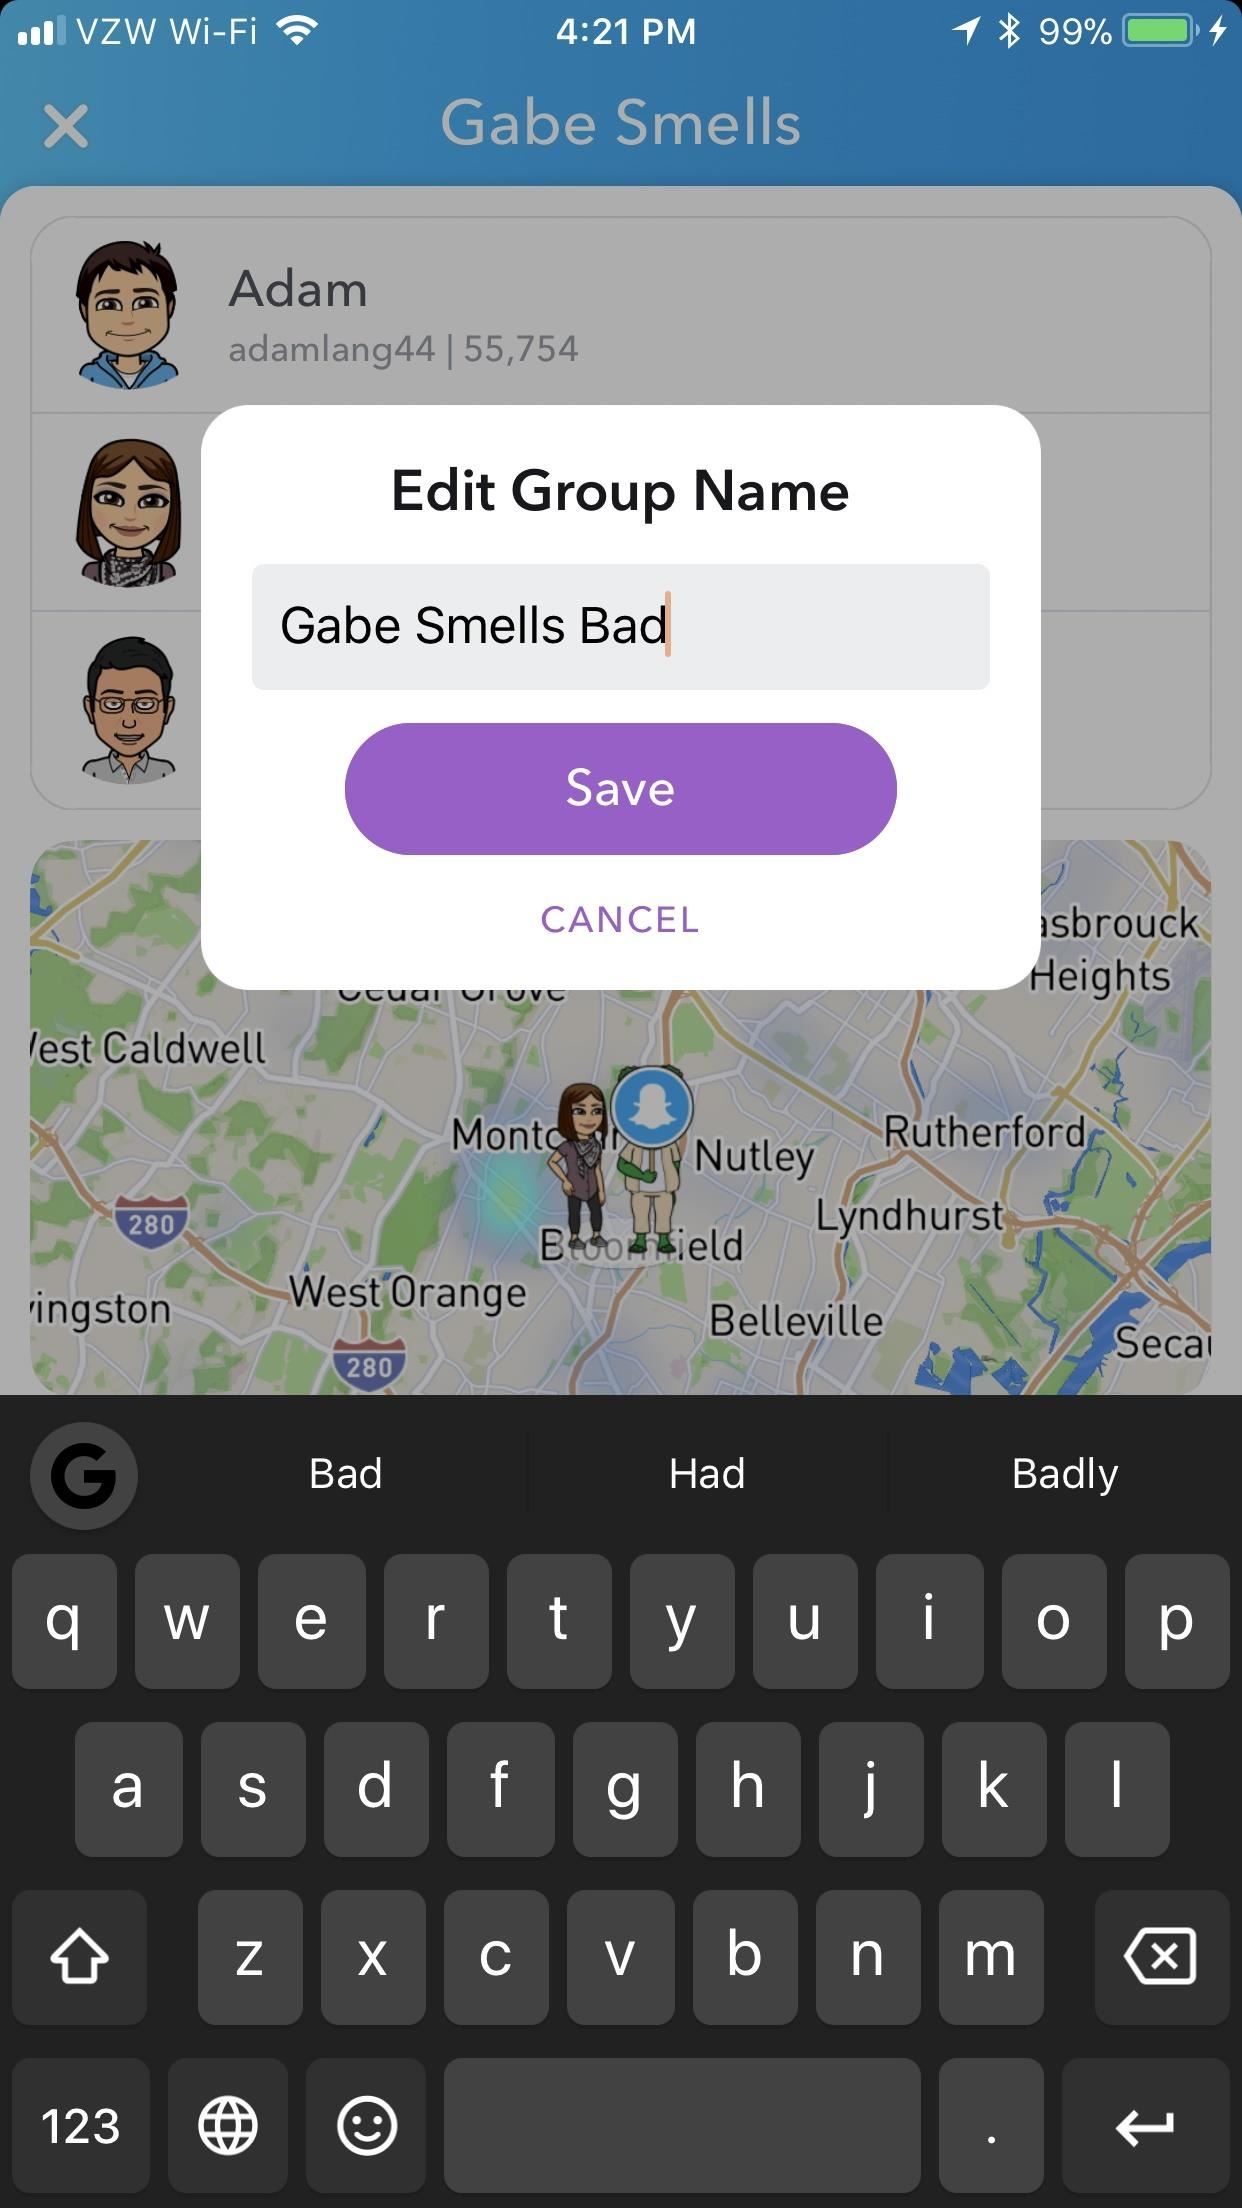 Snapchat 101: Send One Snap & Reach All Your Friends with Groups